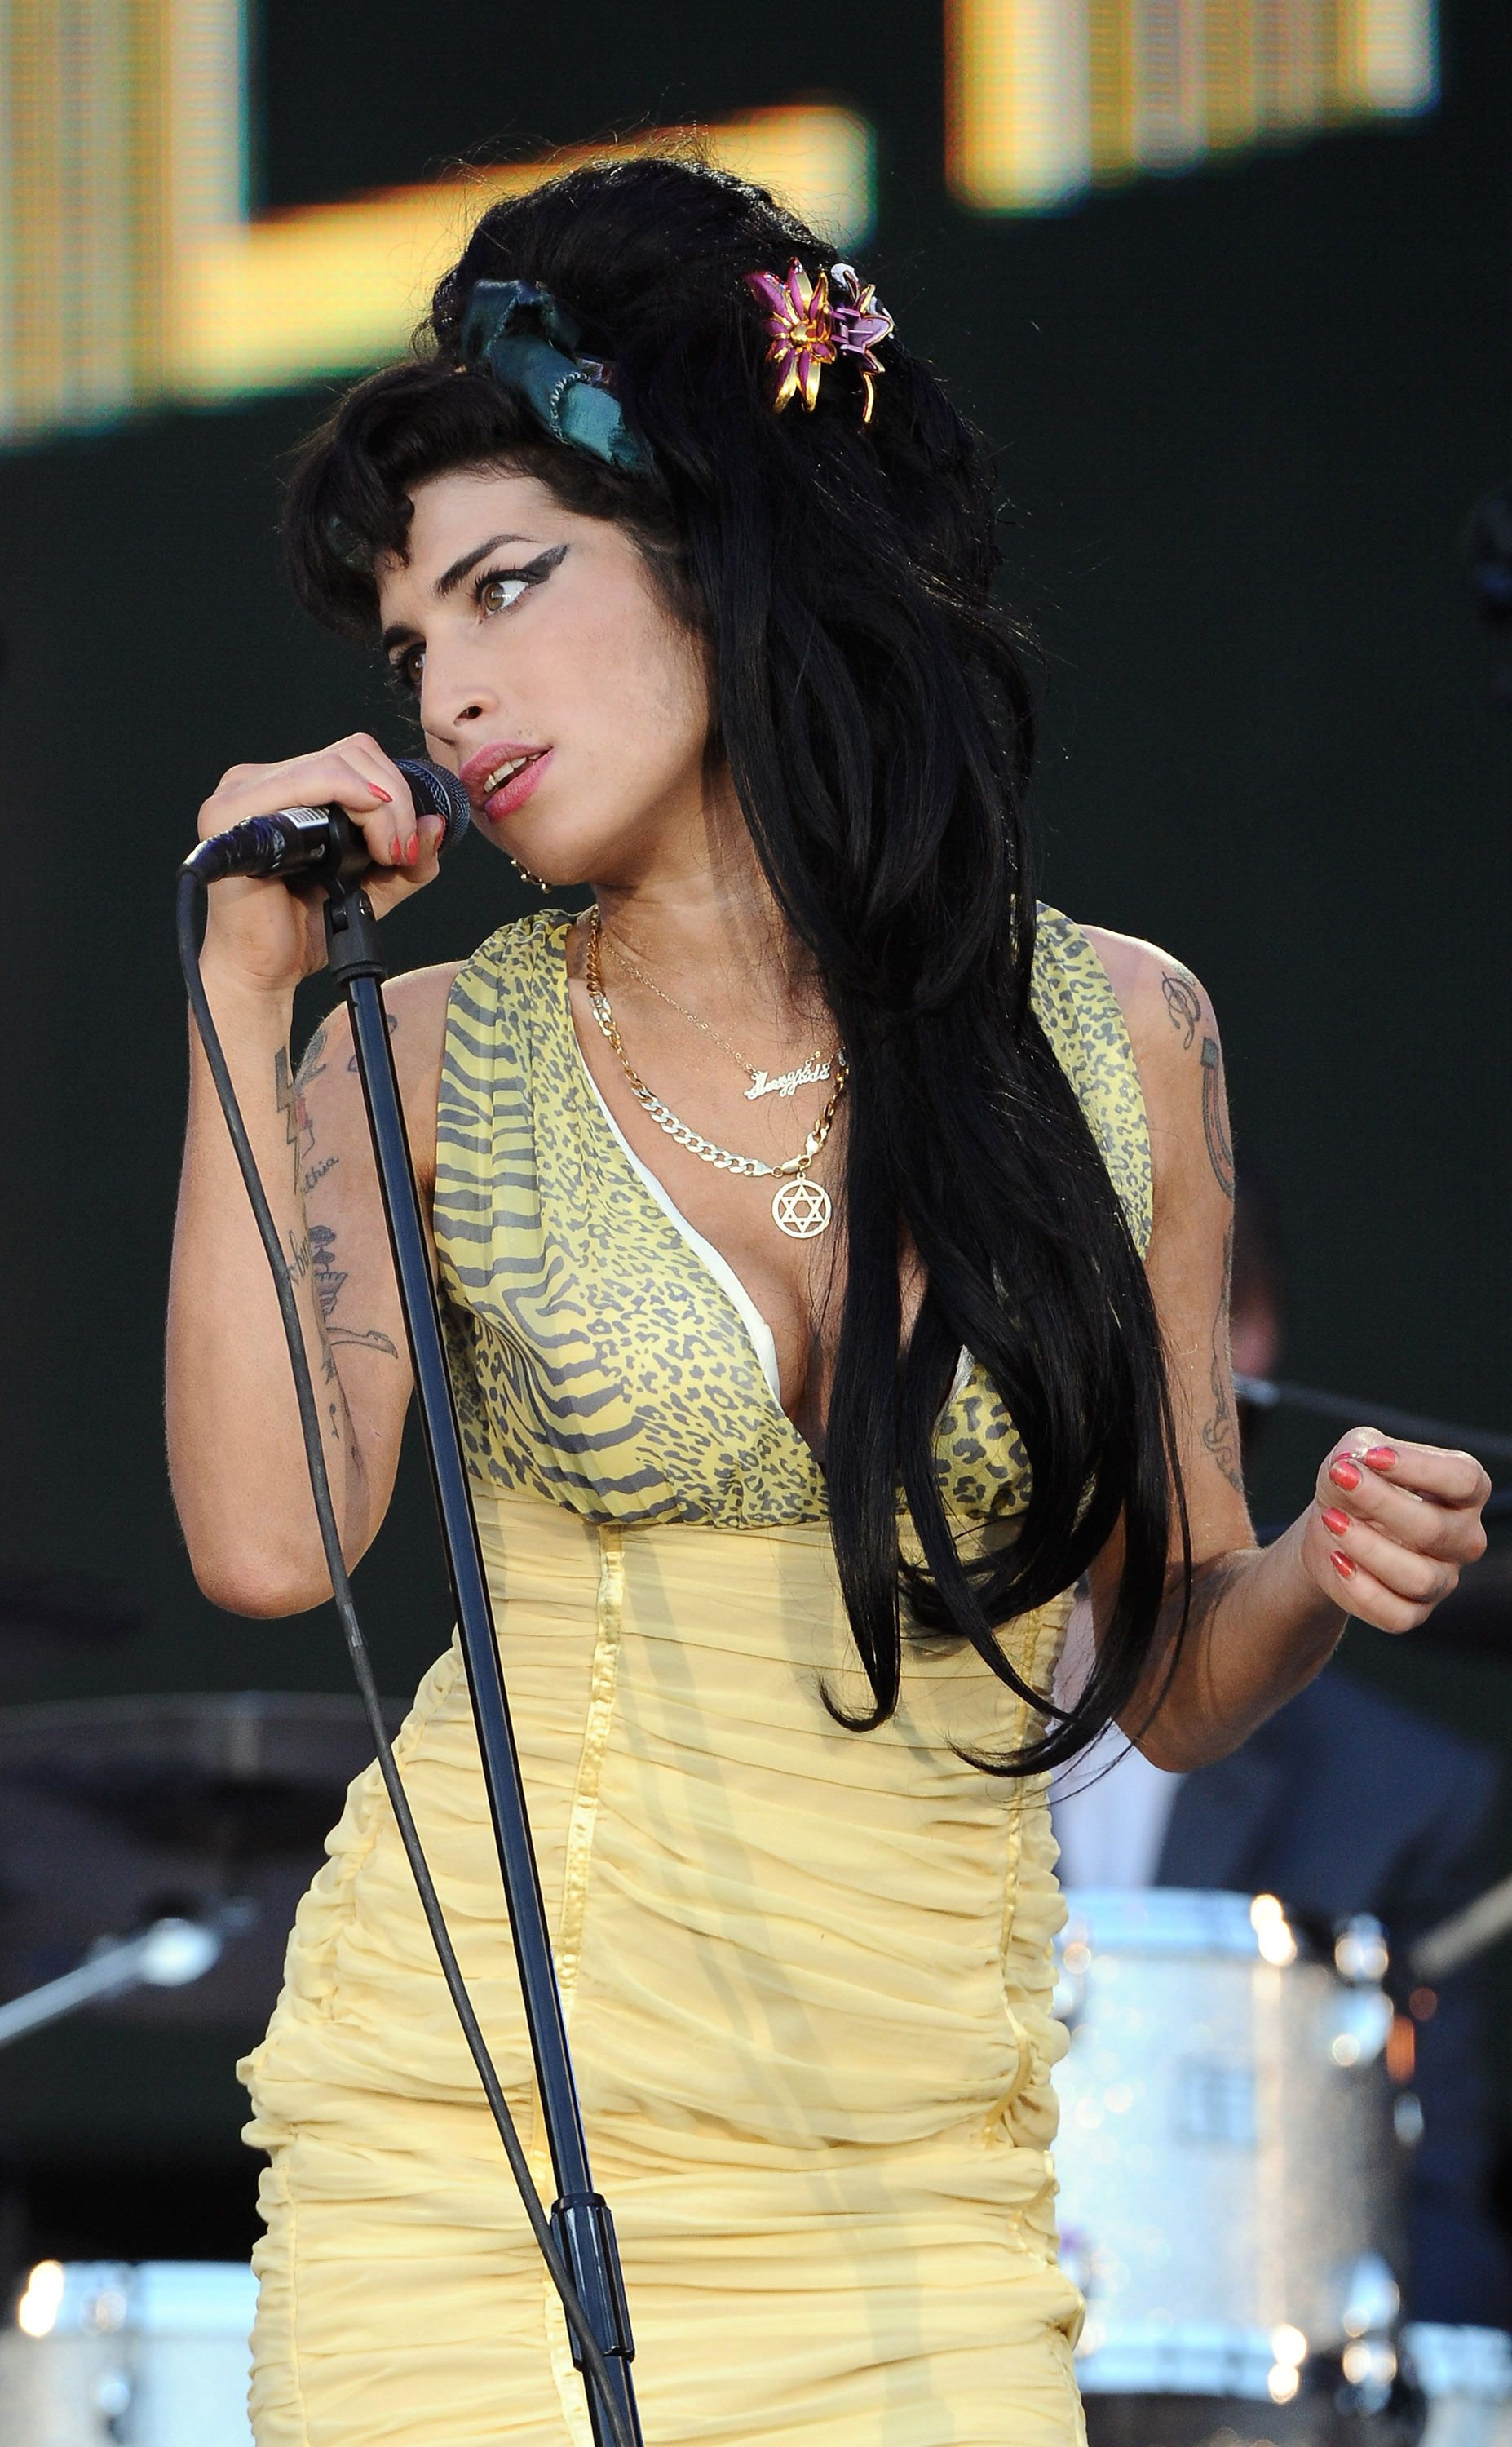 Amy Winehouse Before She Died